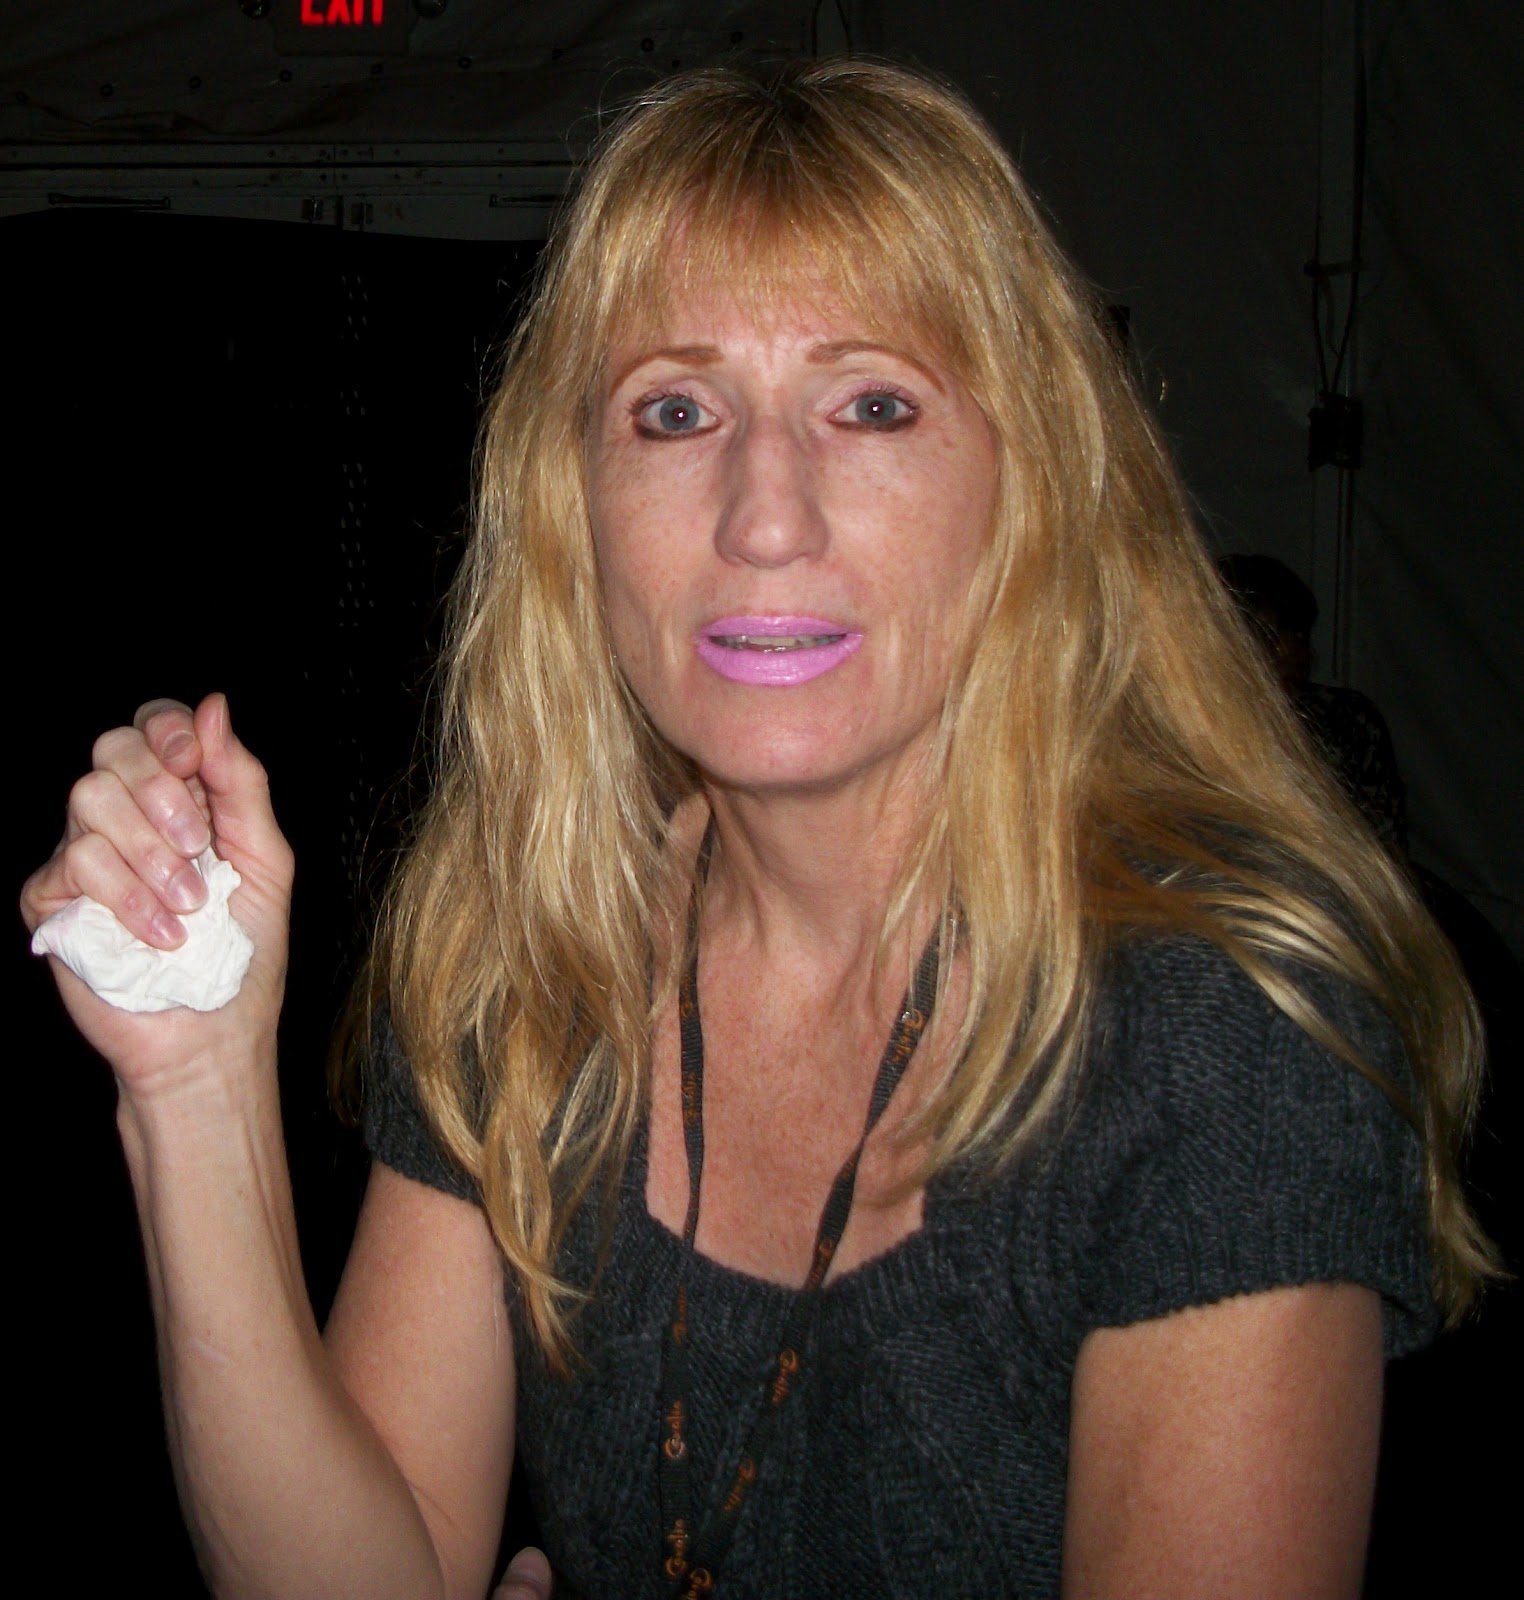 Patti Deutsch holding a piece of tissue while wearing a sleeve